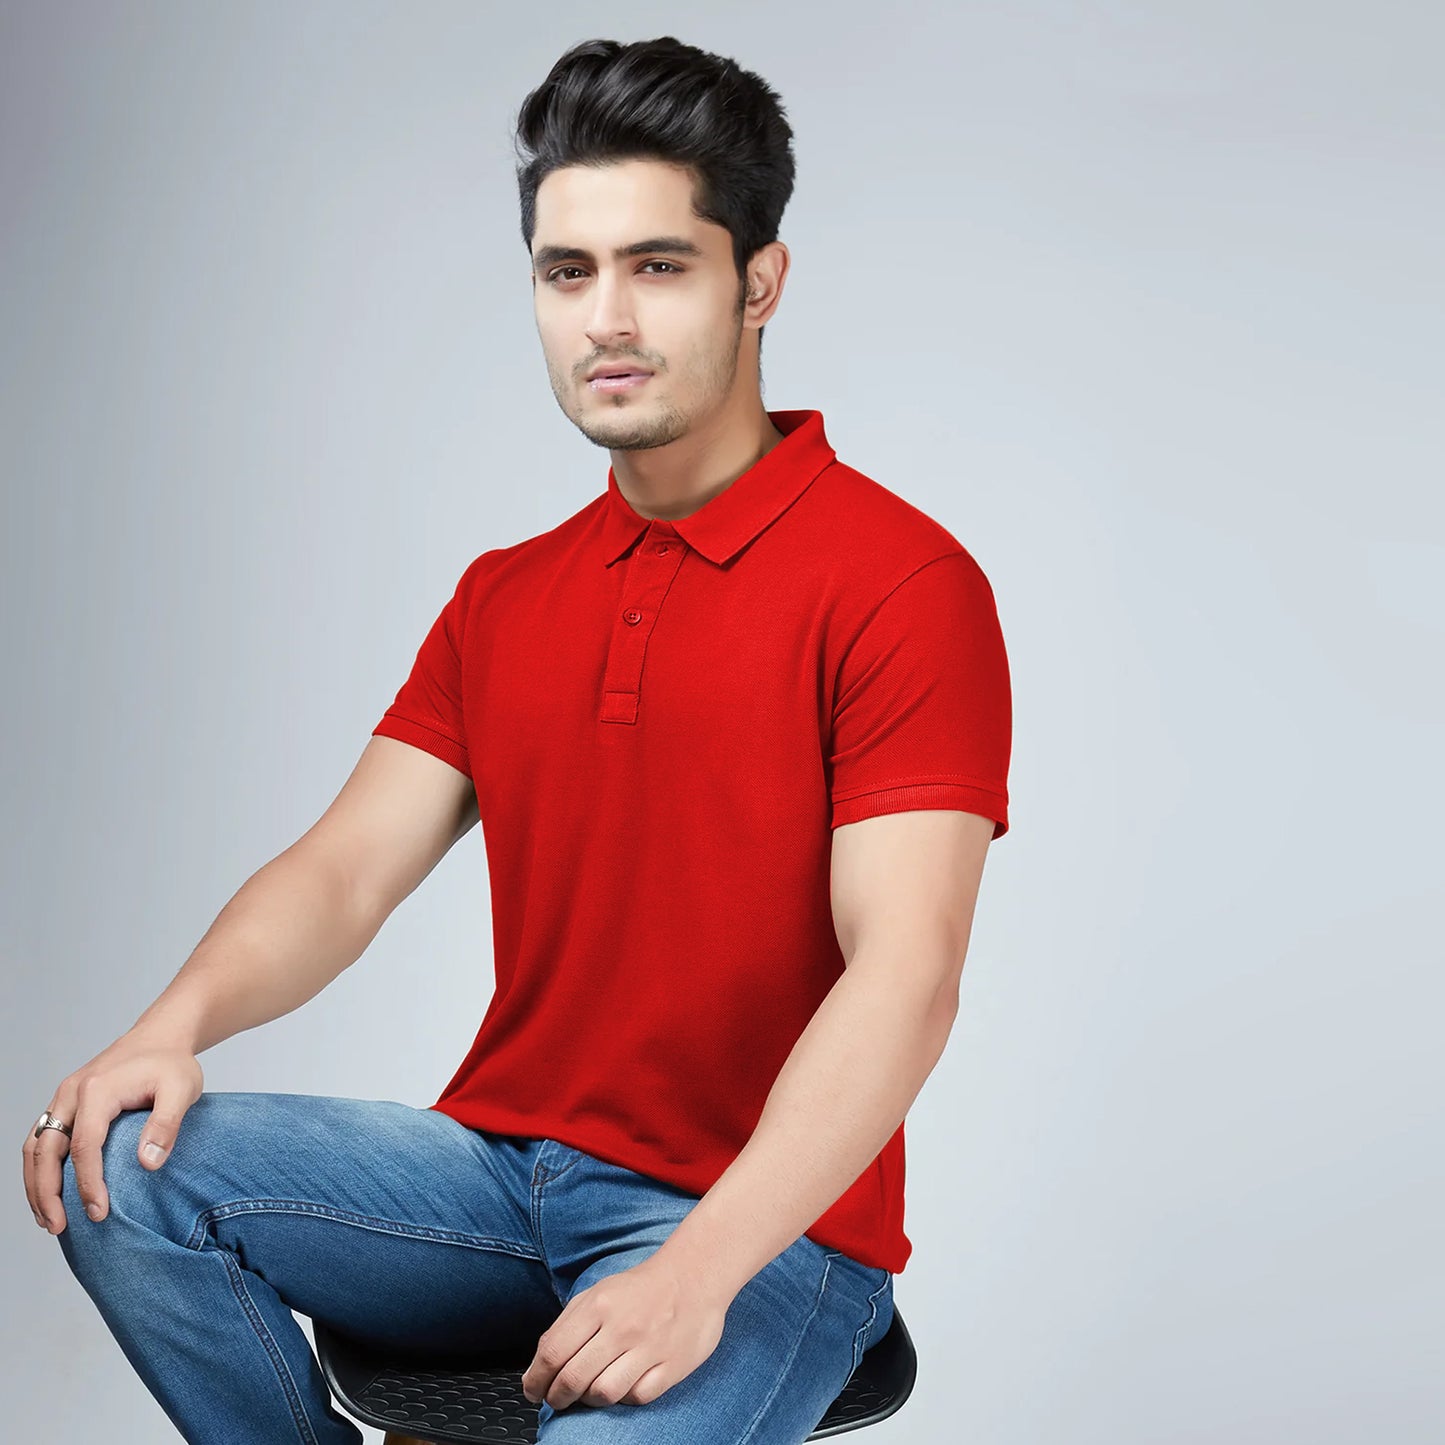 Men's Red Polo T-Shirt